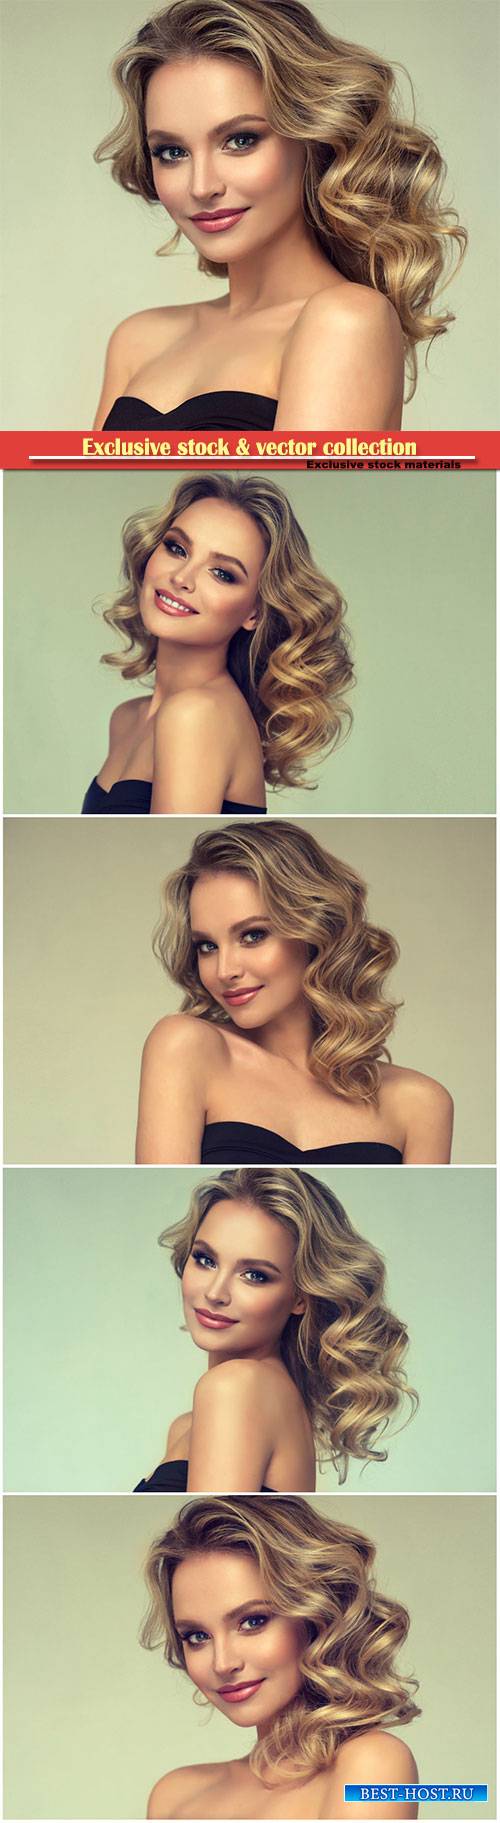 Pretty blond-haired model with middle length curly, loose hairstyle and att ...